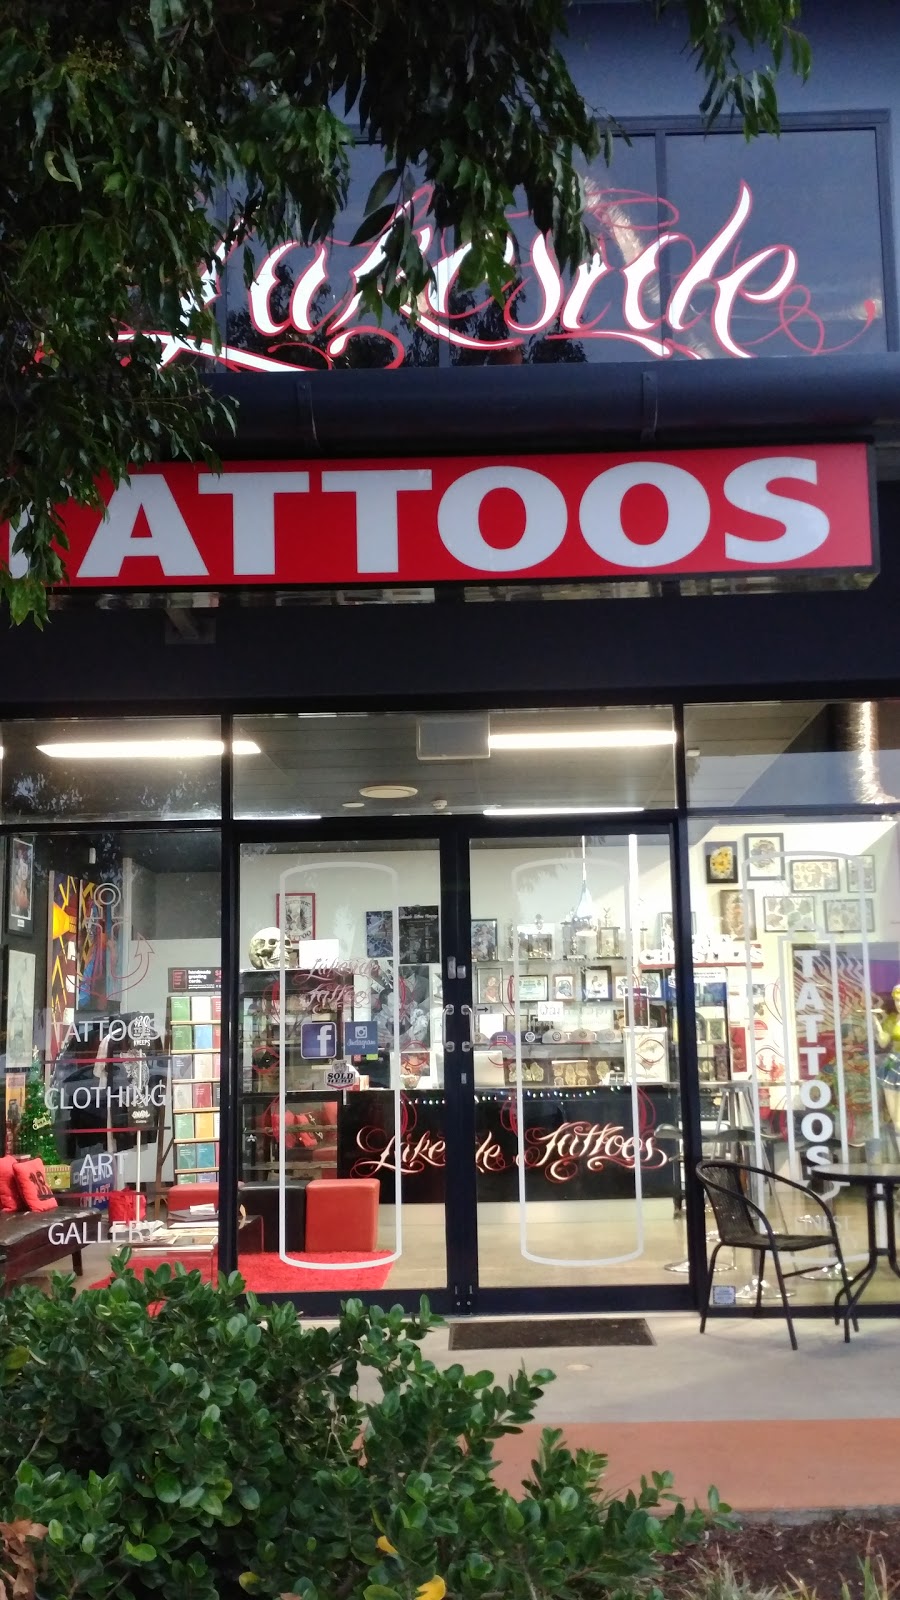 Lakeside Tattoos (17hb/15 Bunker Rd) Opening Hours